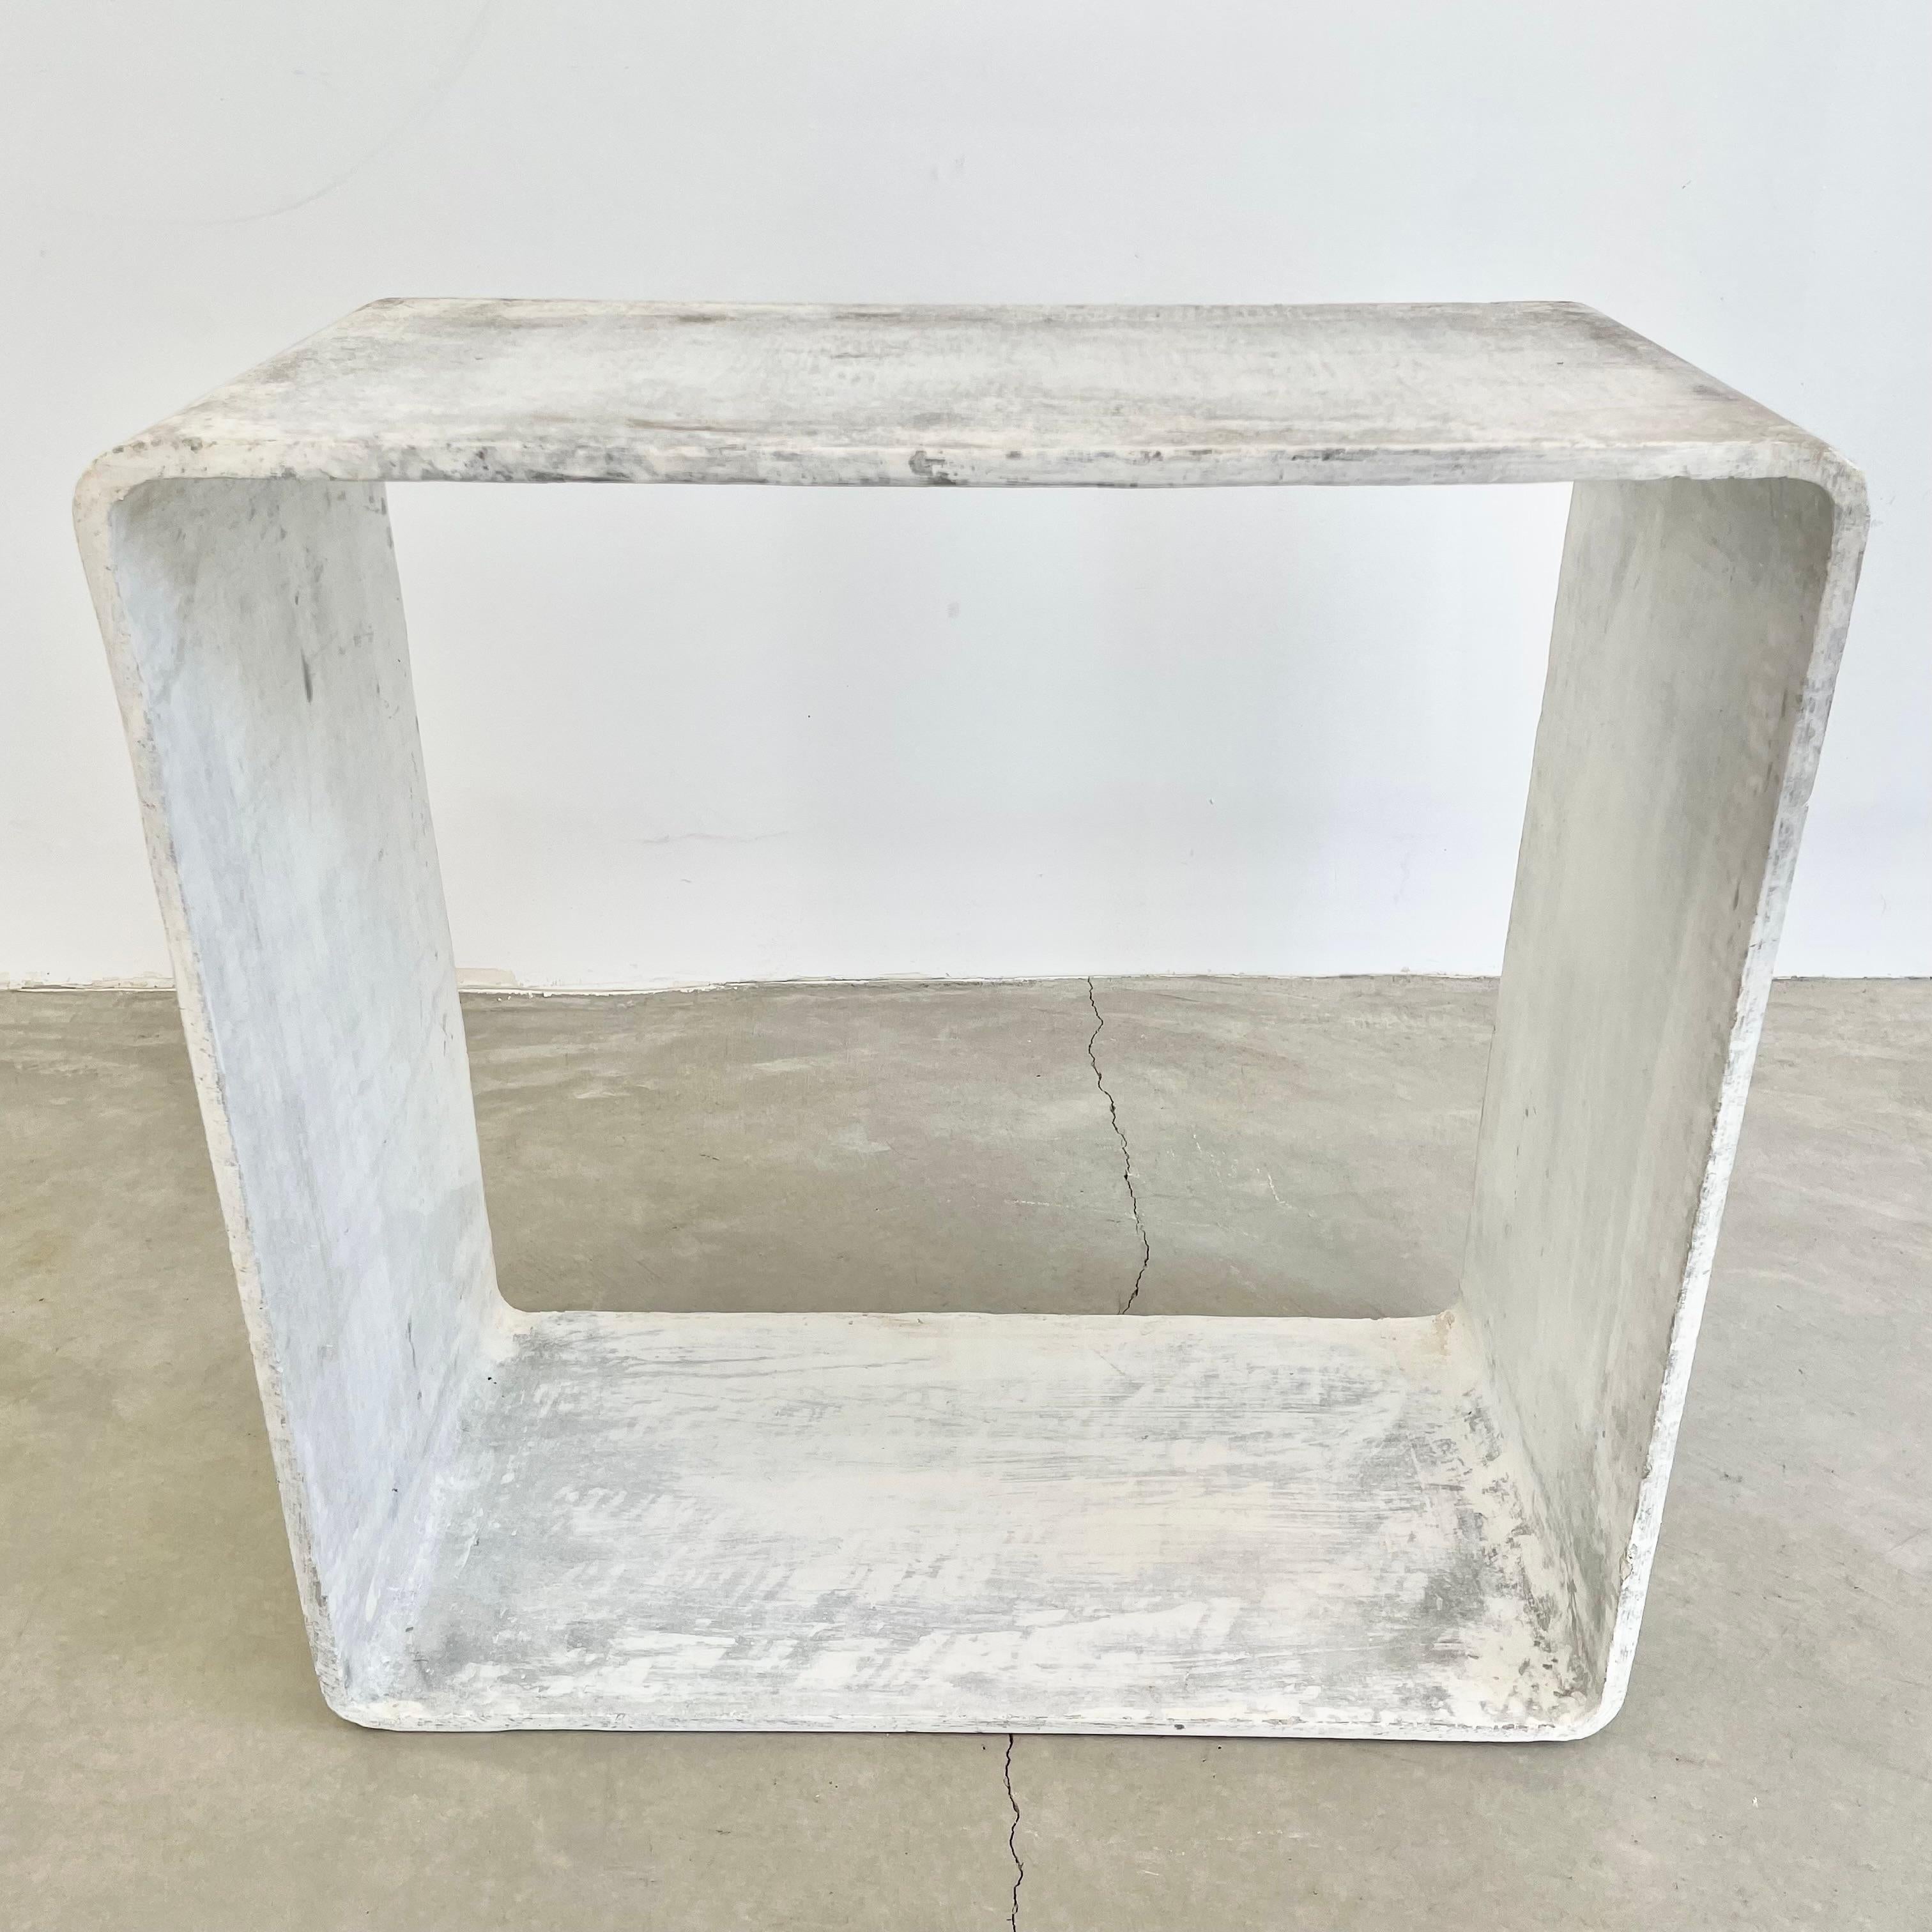 Willy Guhl Concrete Cube Side Table, 1960s Switzerland For Sale 8